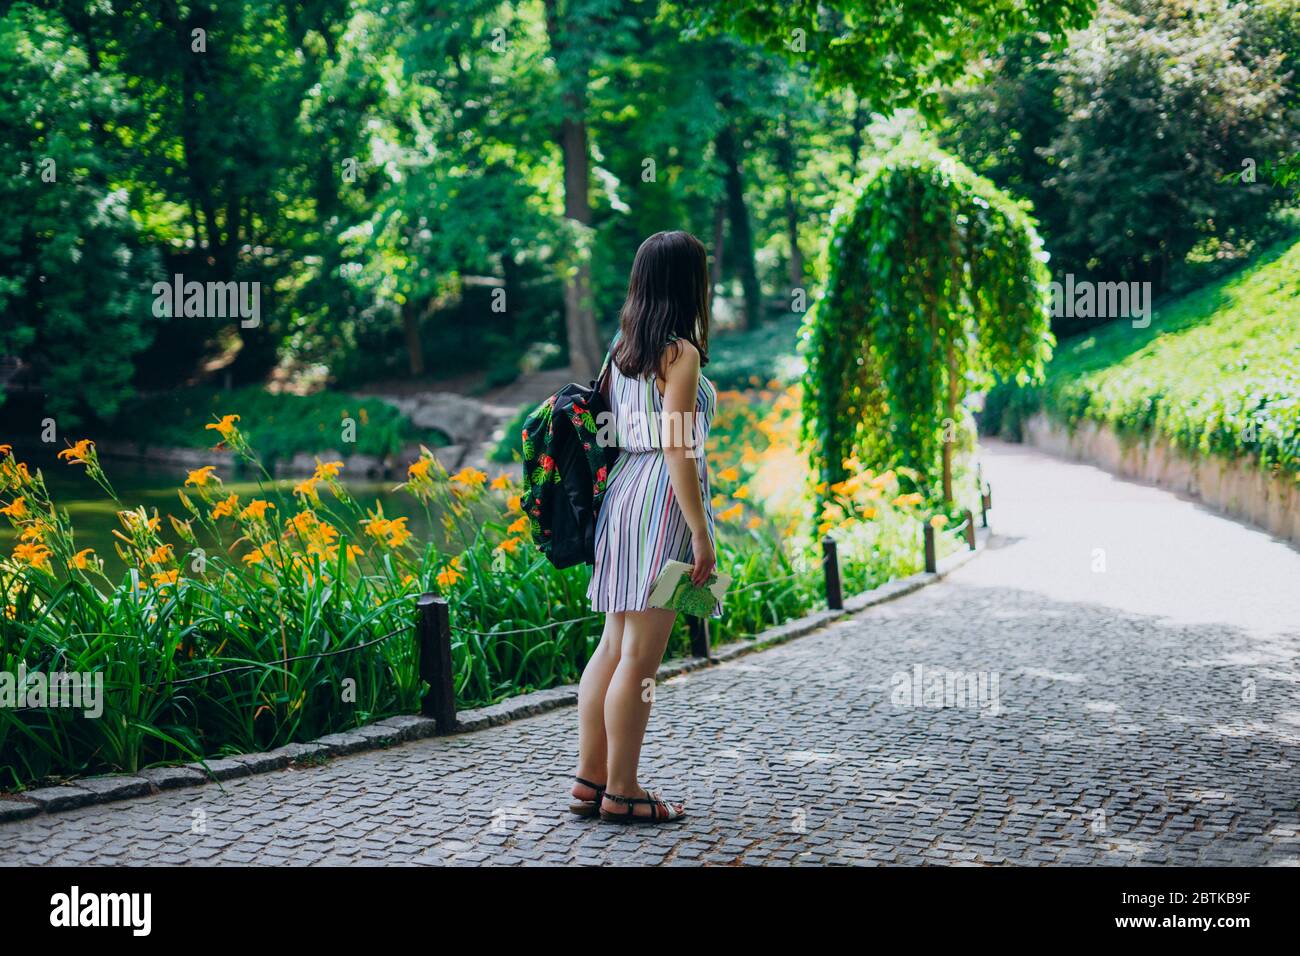 Sofia Park, Uman. Young woman with a backpack walking in the park. Girl in a sundress and a tourist map on the trail in the park. Tourist with a backp Stock Photo